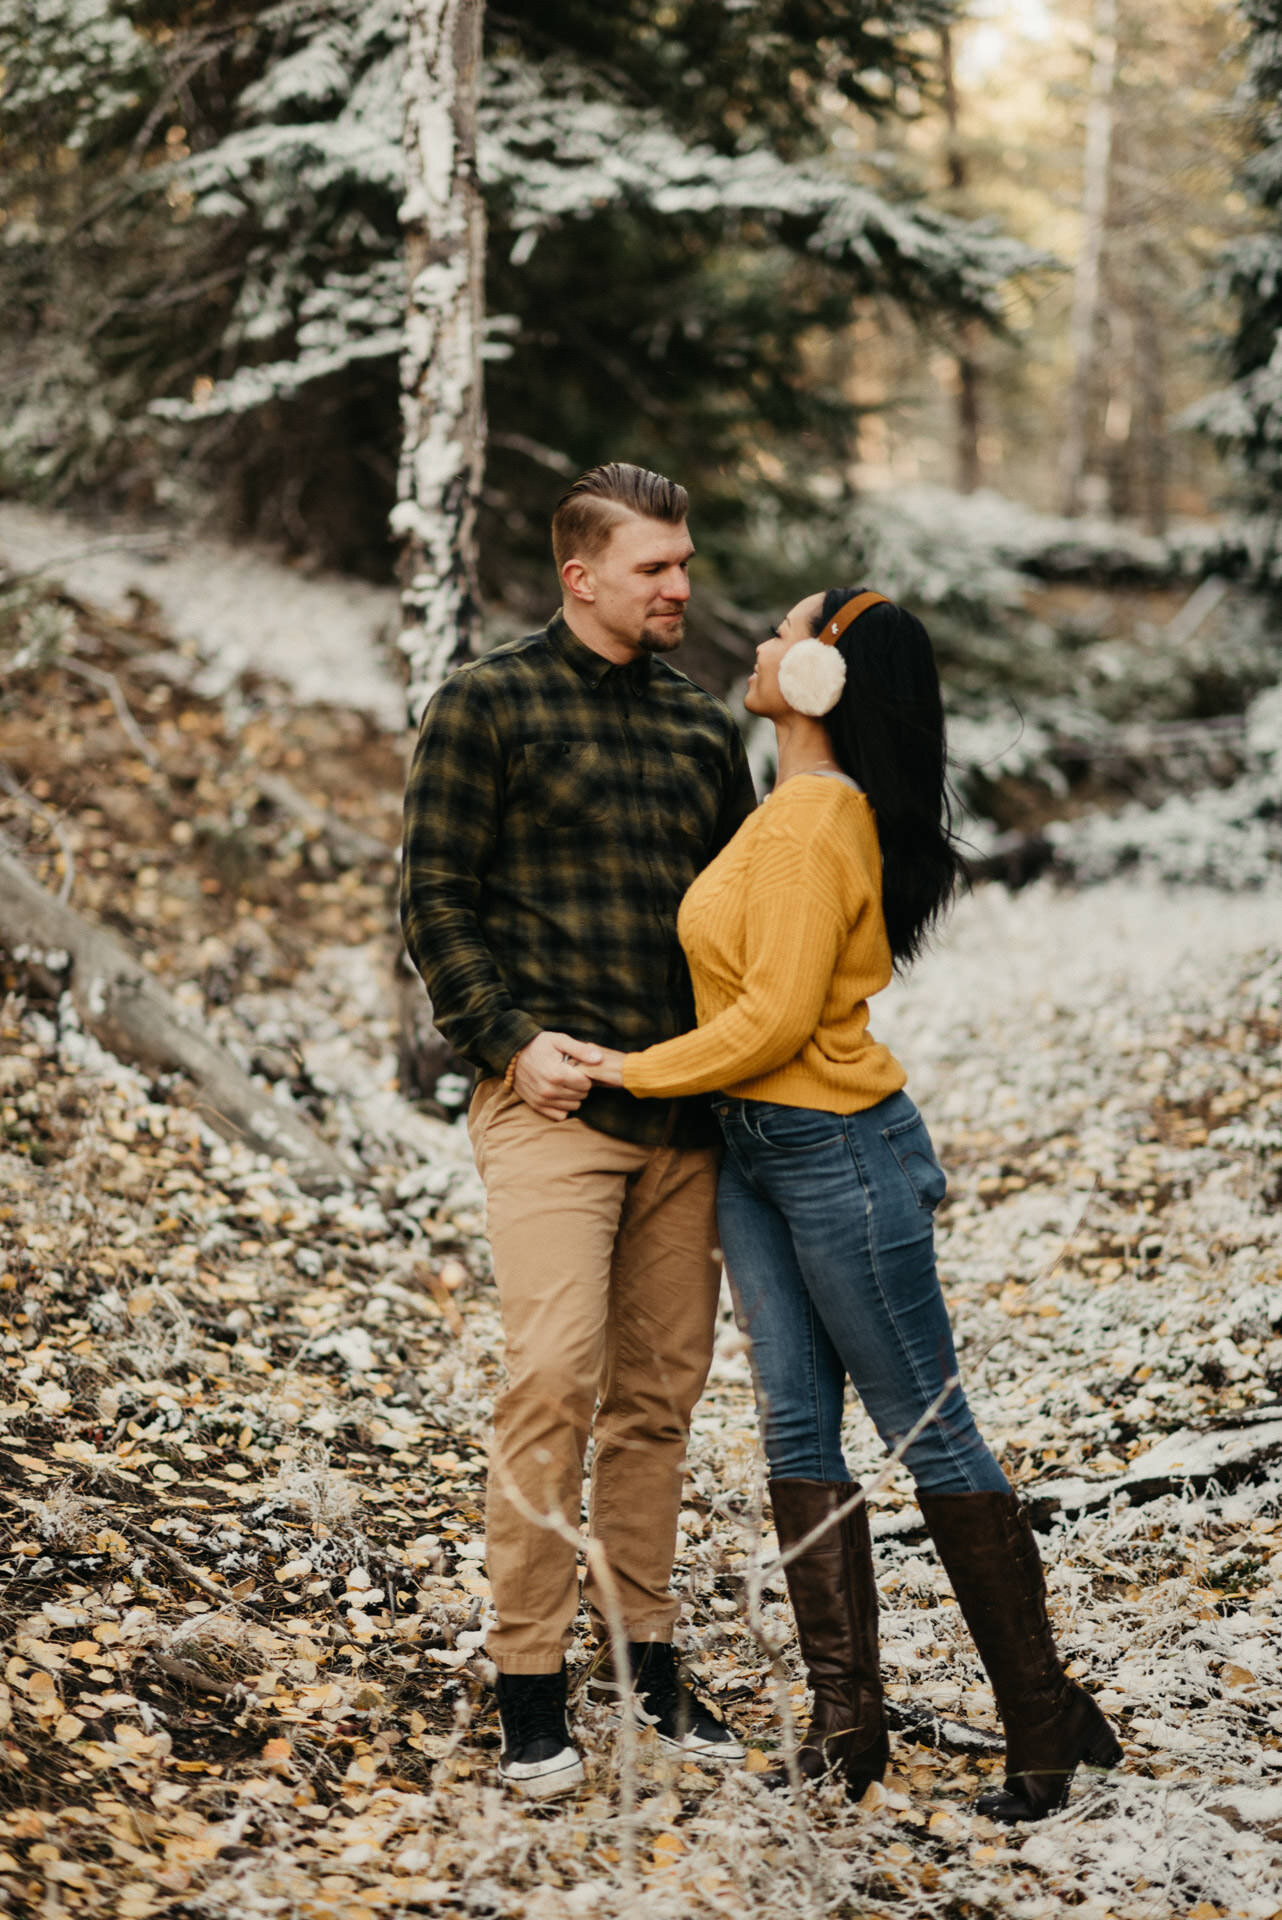 kelsey-rob-snowy-fall-leaves-evergreen-colorado-engagement-session-8.jpg